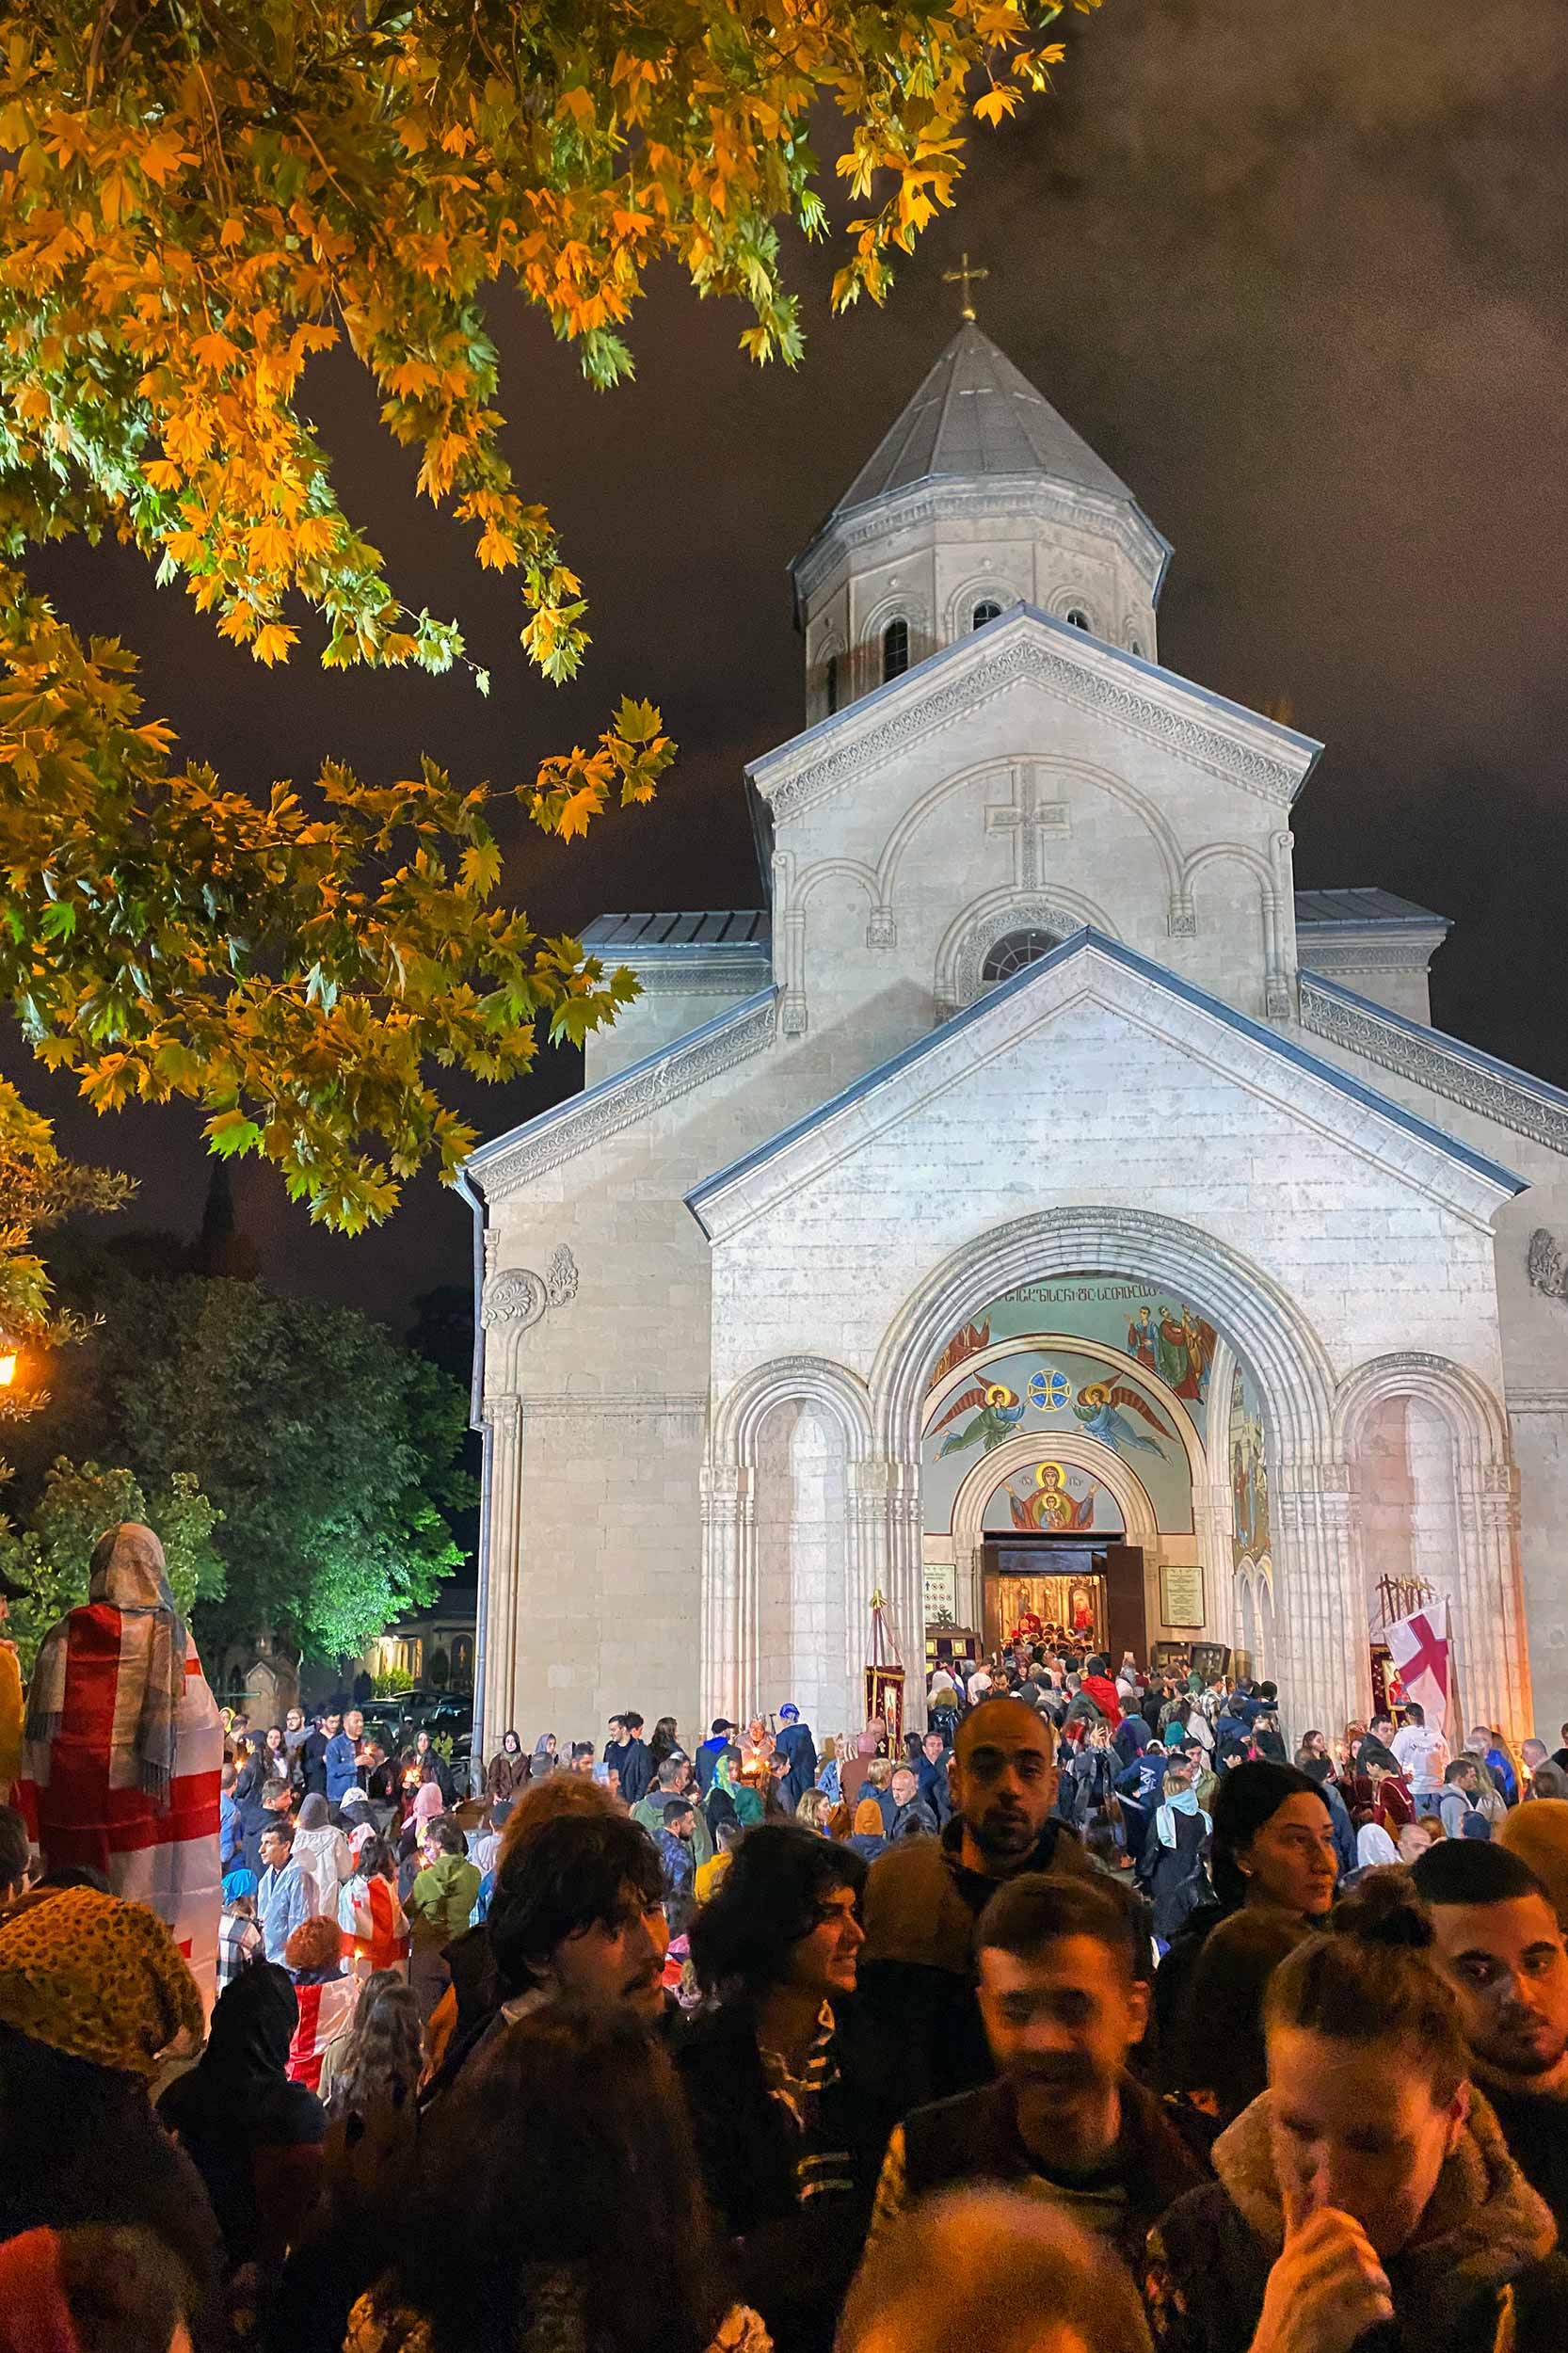 Easter vigil in the yard of Kashveti Church on Rustaveli Avenue, where young protesters joined parishioners in a symbolic act of reconciliation and mutual understanding. © Beka Bajelidze